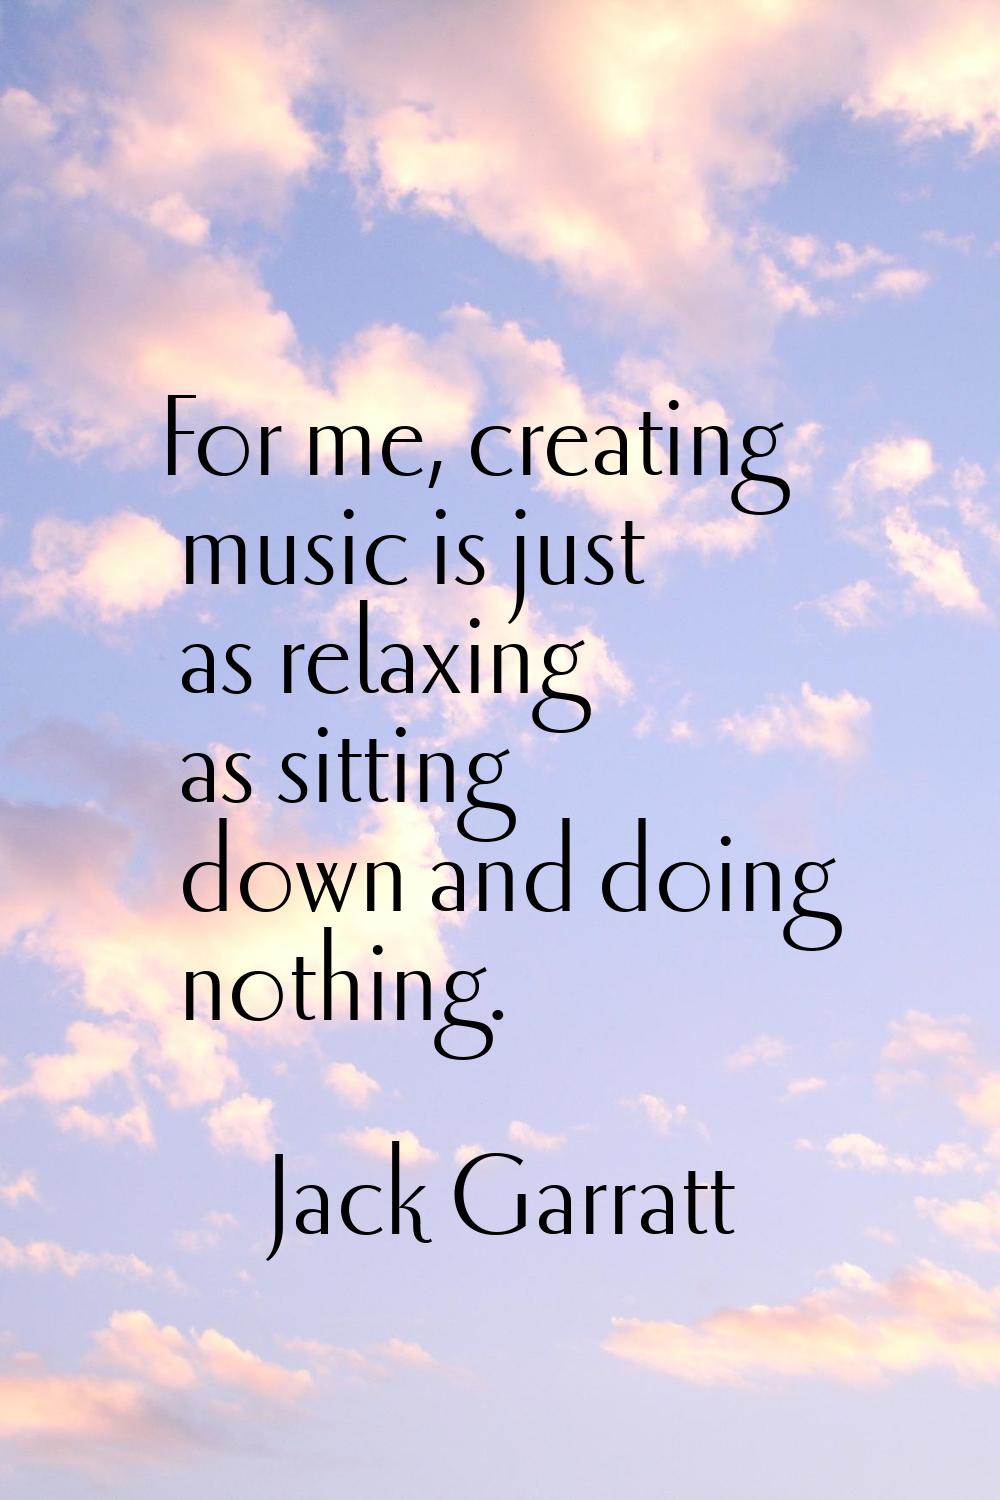 For me, creating music is just as relaxing as sitting down and doing nothing.